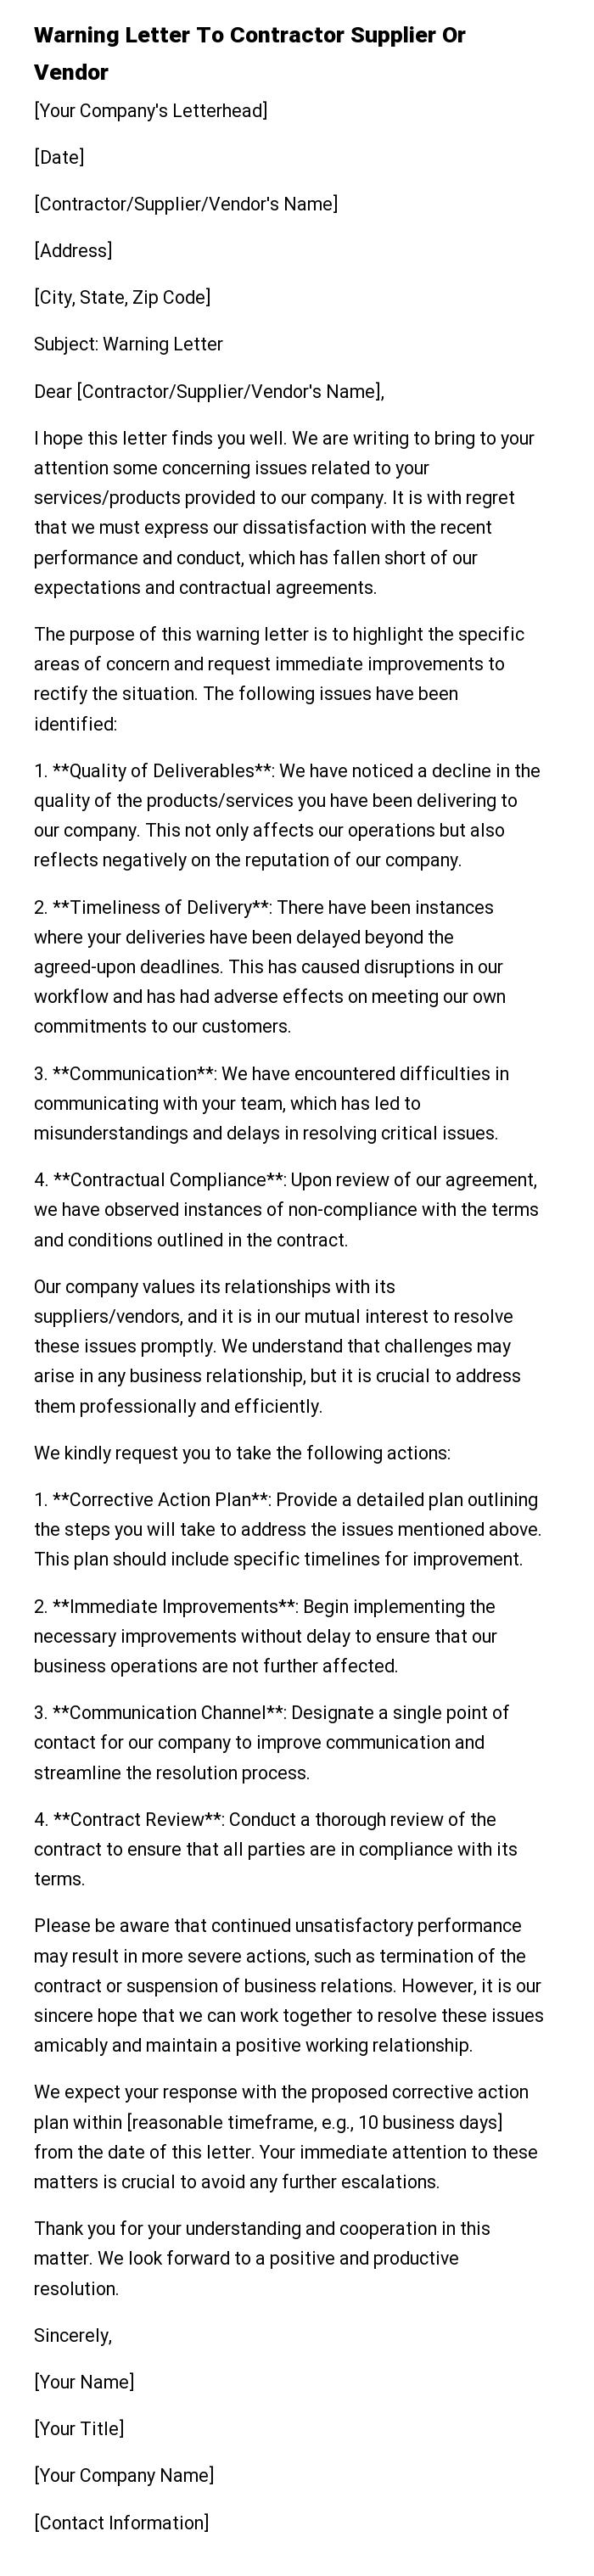 Warning Letter To Contractor Supplier Or Vendor